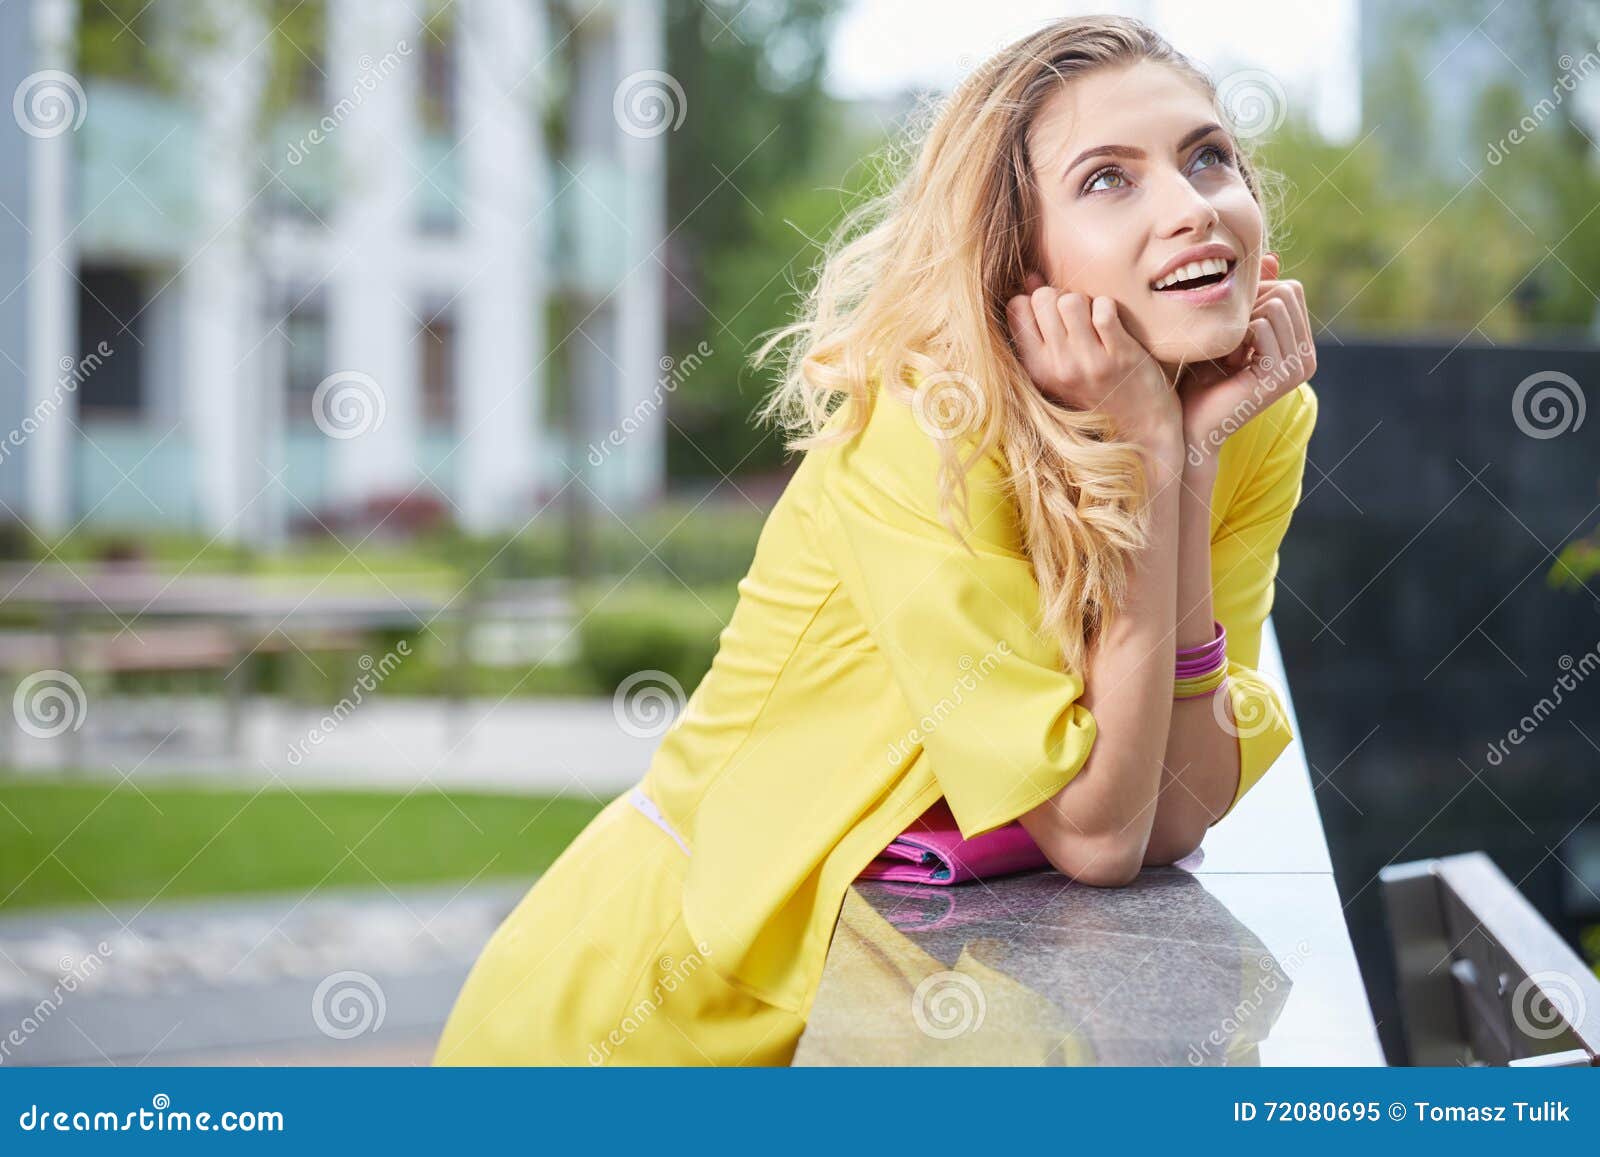 Woman in Yellow Dress Posing Outdoors Stock Image - Image of look ...